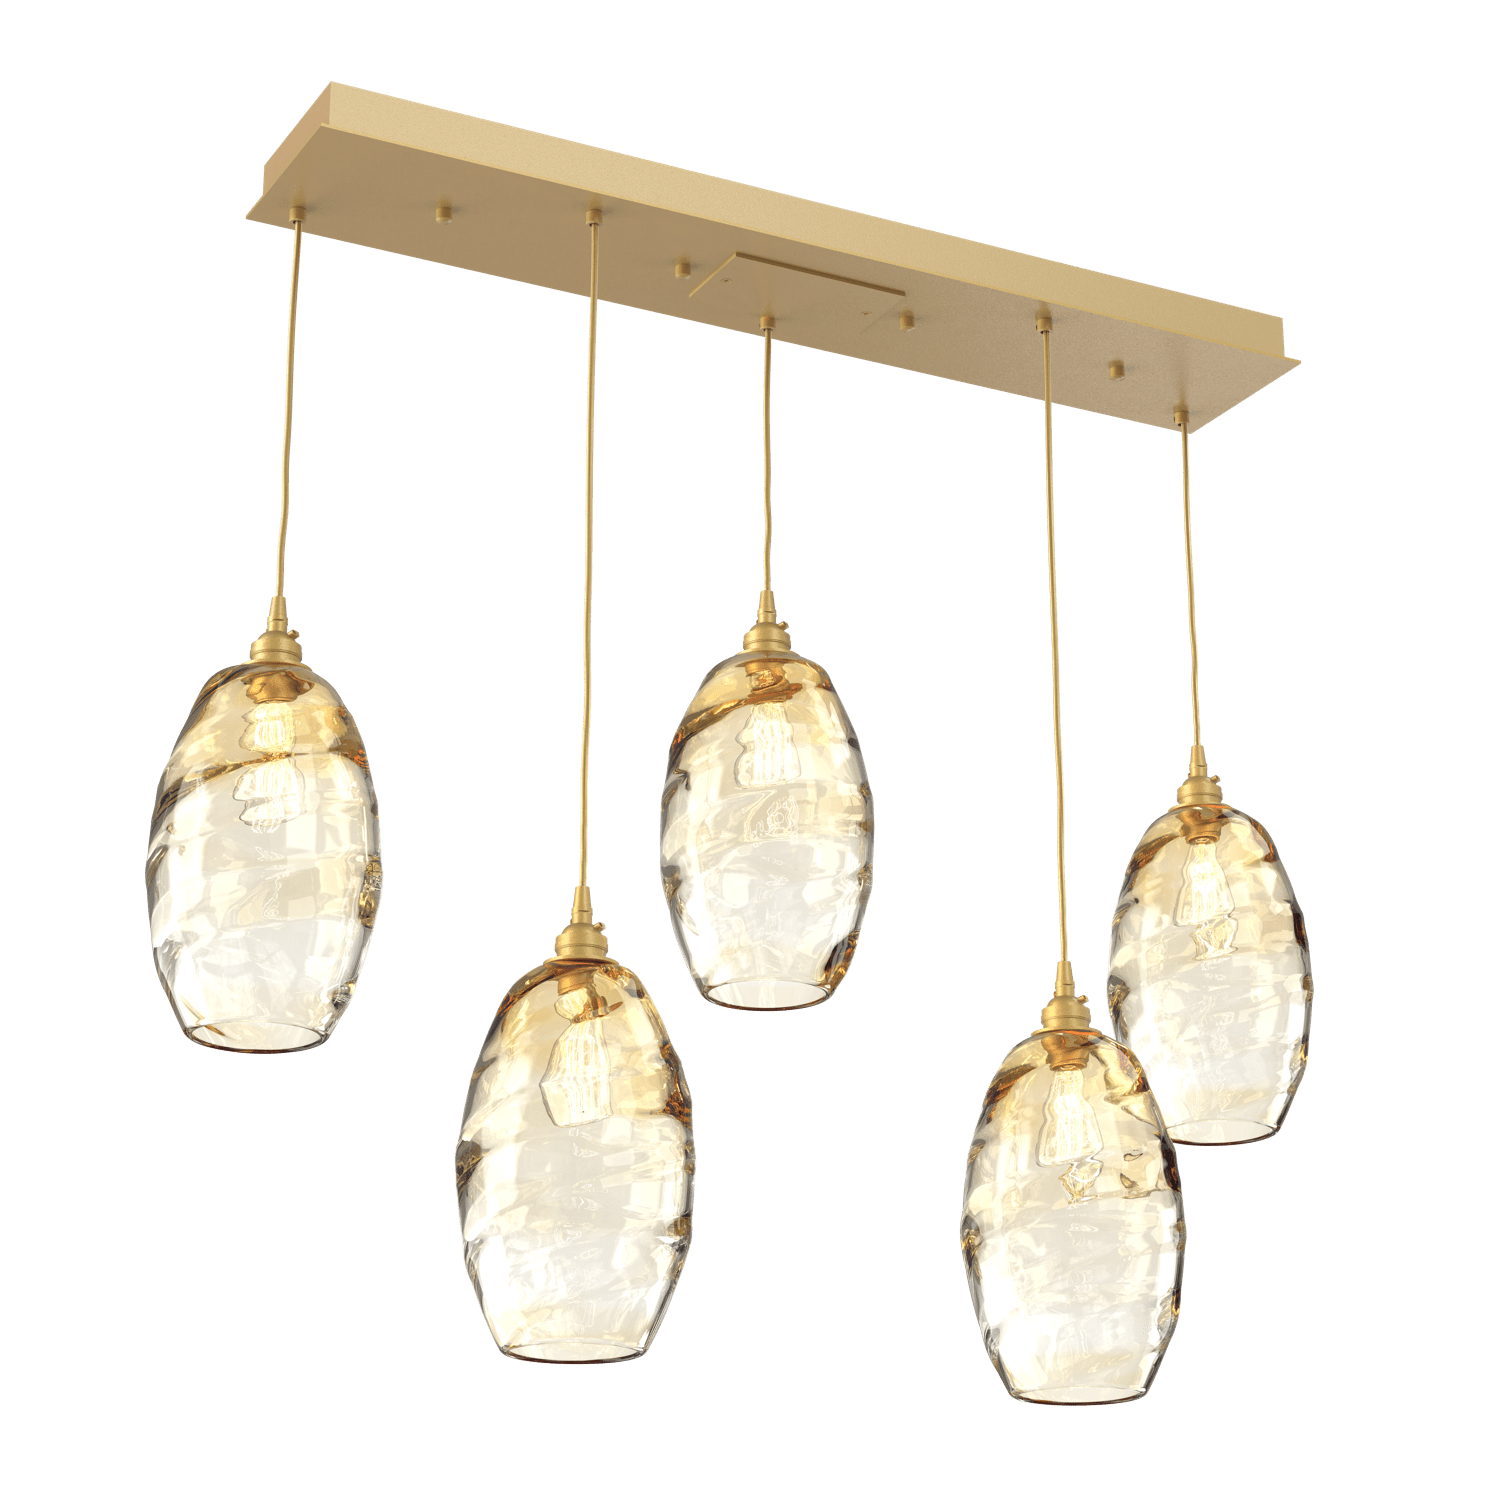 PLB0035-05-GB-OA-Hammerton-Studio-Optic-Blown-Glass-Elisse-5-light-linear-pendant-chandelier-with-gilded-brass-finish-and-optic-amber-blown-glass-shades-and-incandescent-lamping